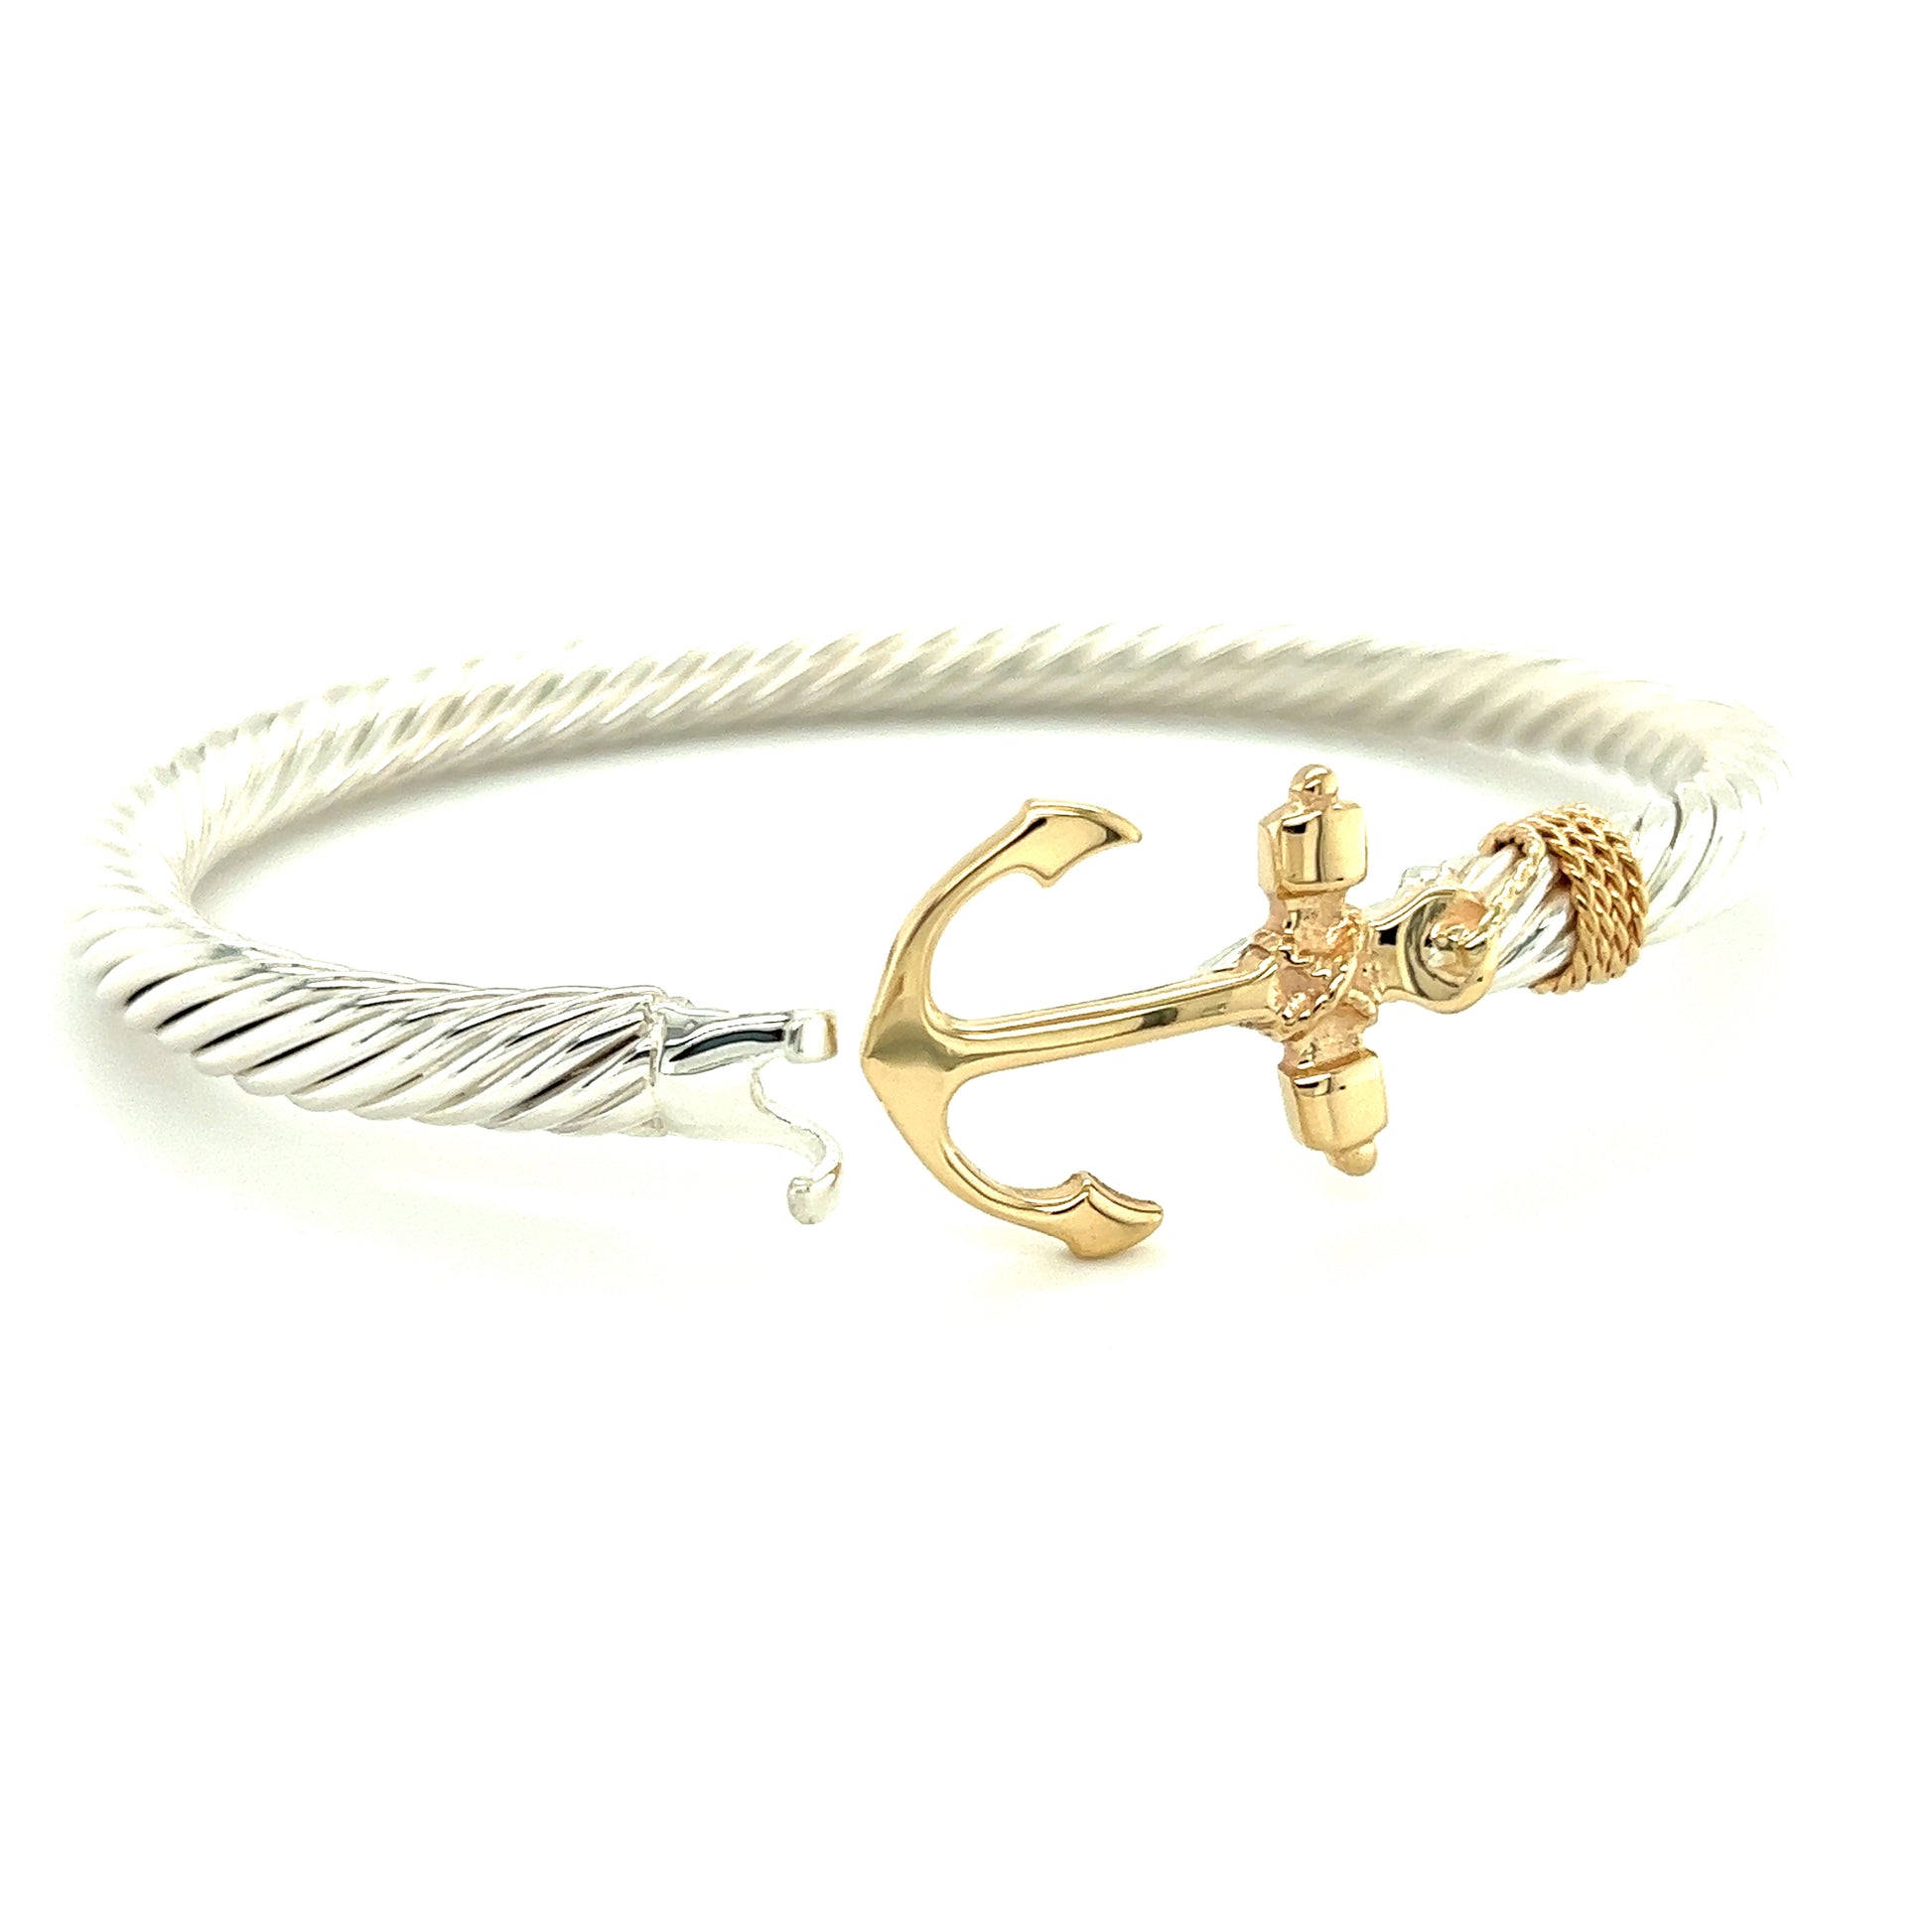 Twisted Cable 5mm Bangle Bracelet with 14K Yellow Gold Anchor and Wrap in Sterling Silver Flat Angled View